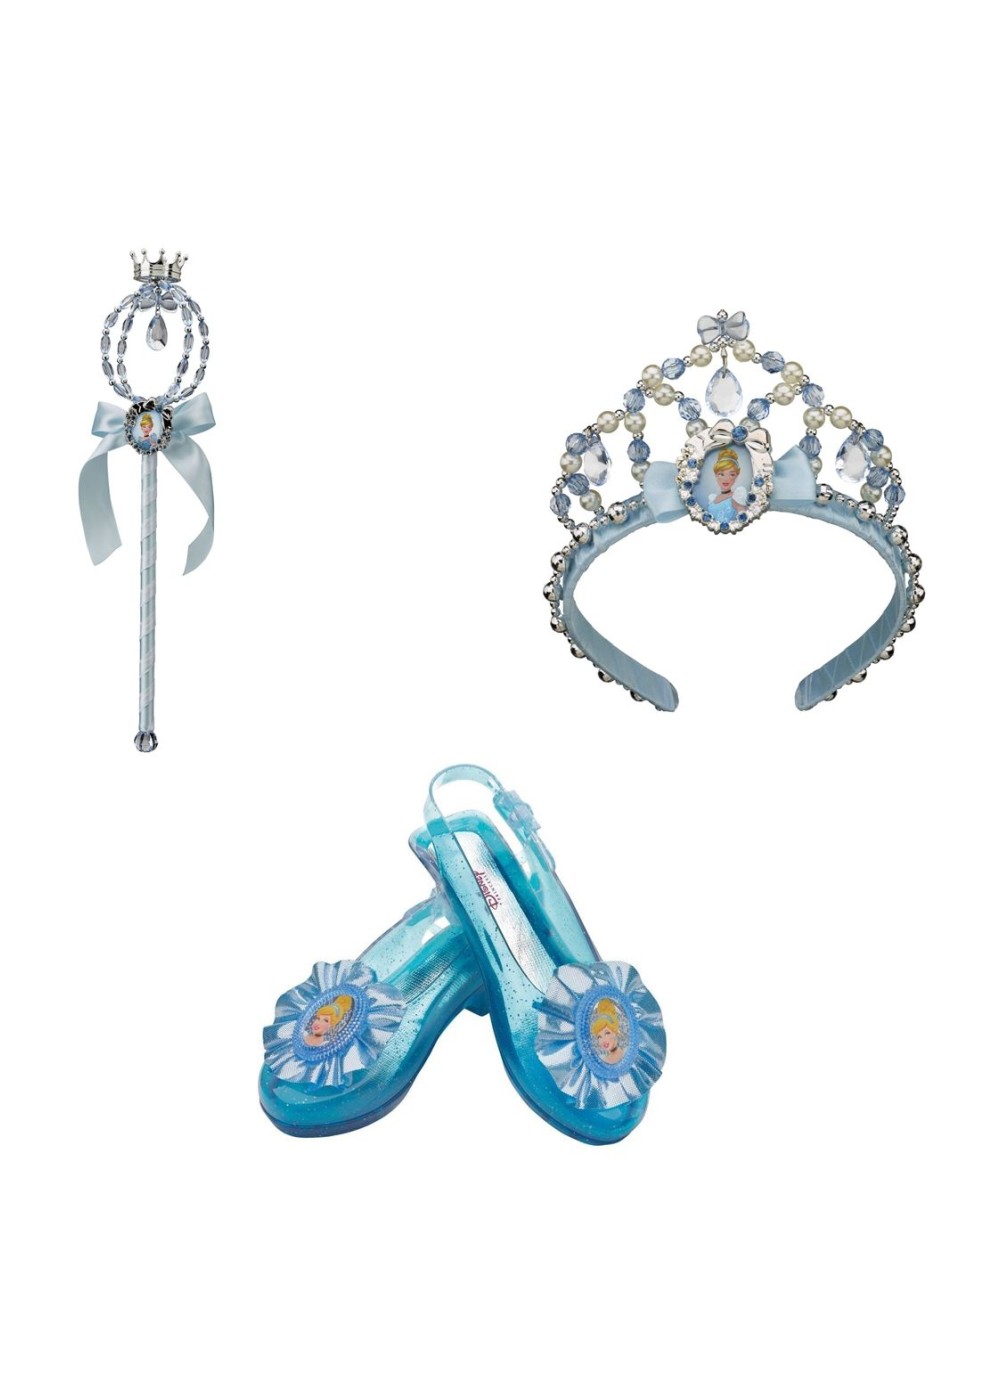 Cinderella Shoes Wand And Tiara Accessory Kit